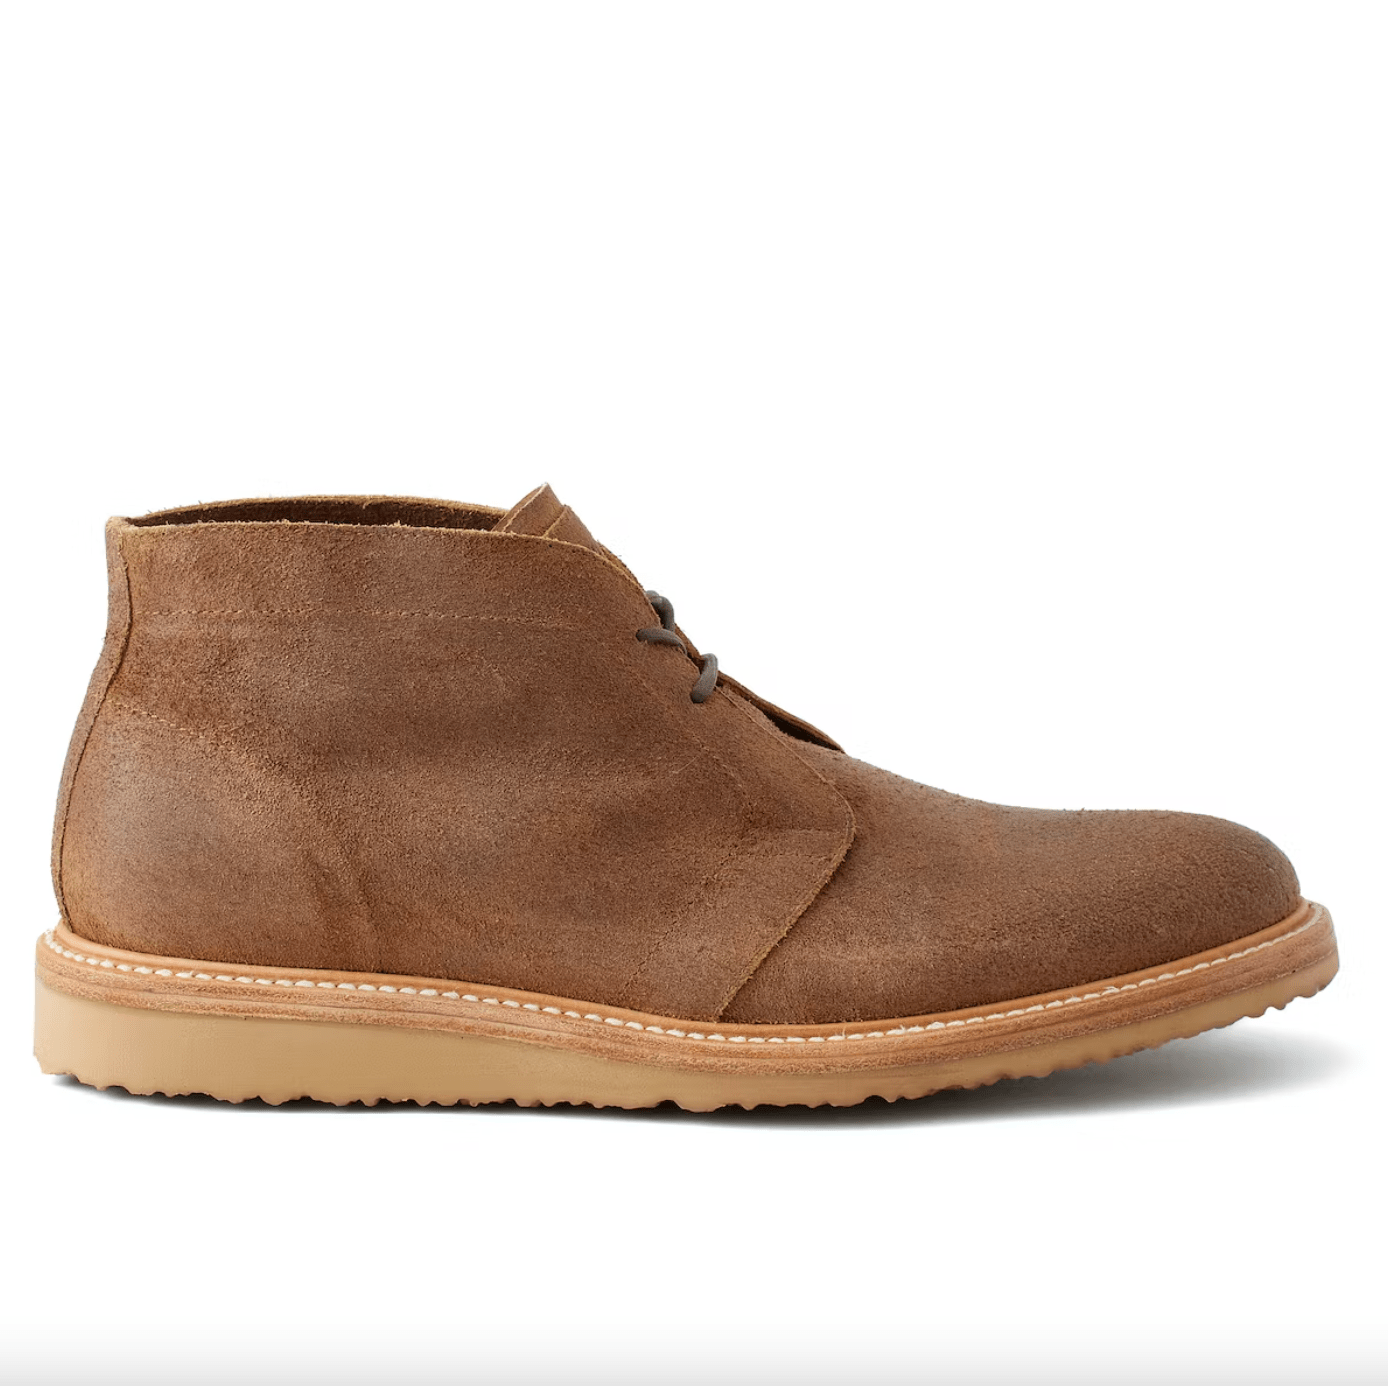 Get To Stepping This Fall With Men's Boots From Huckberry - BroBible